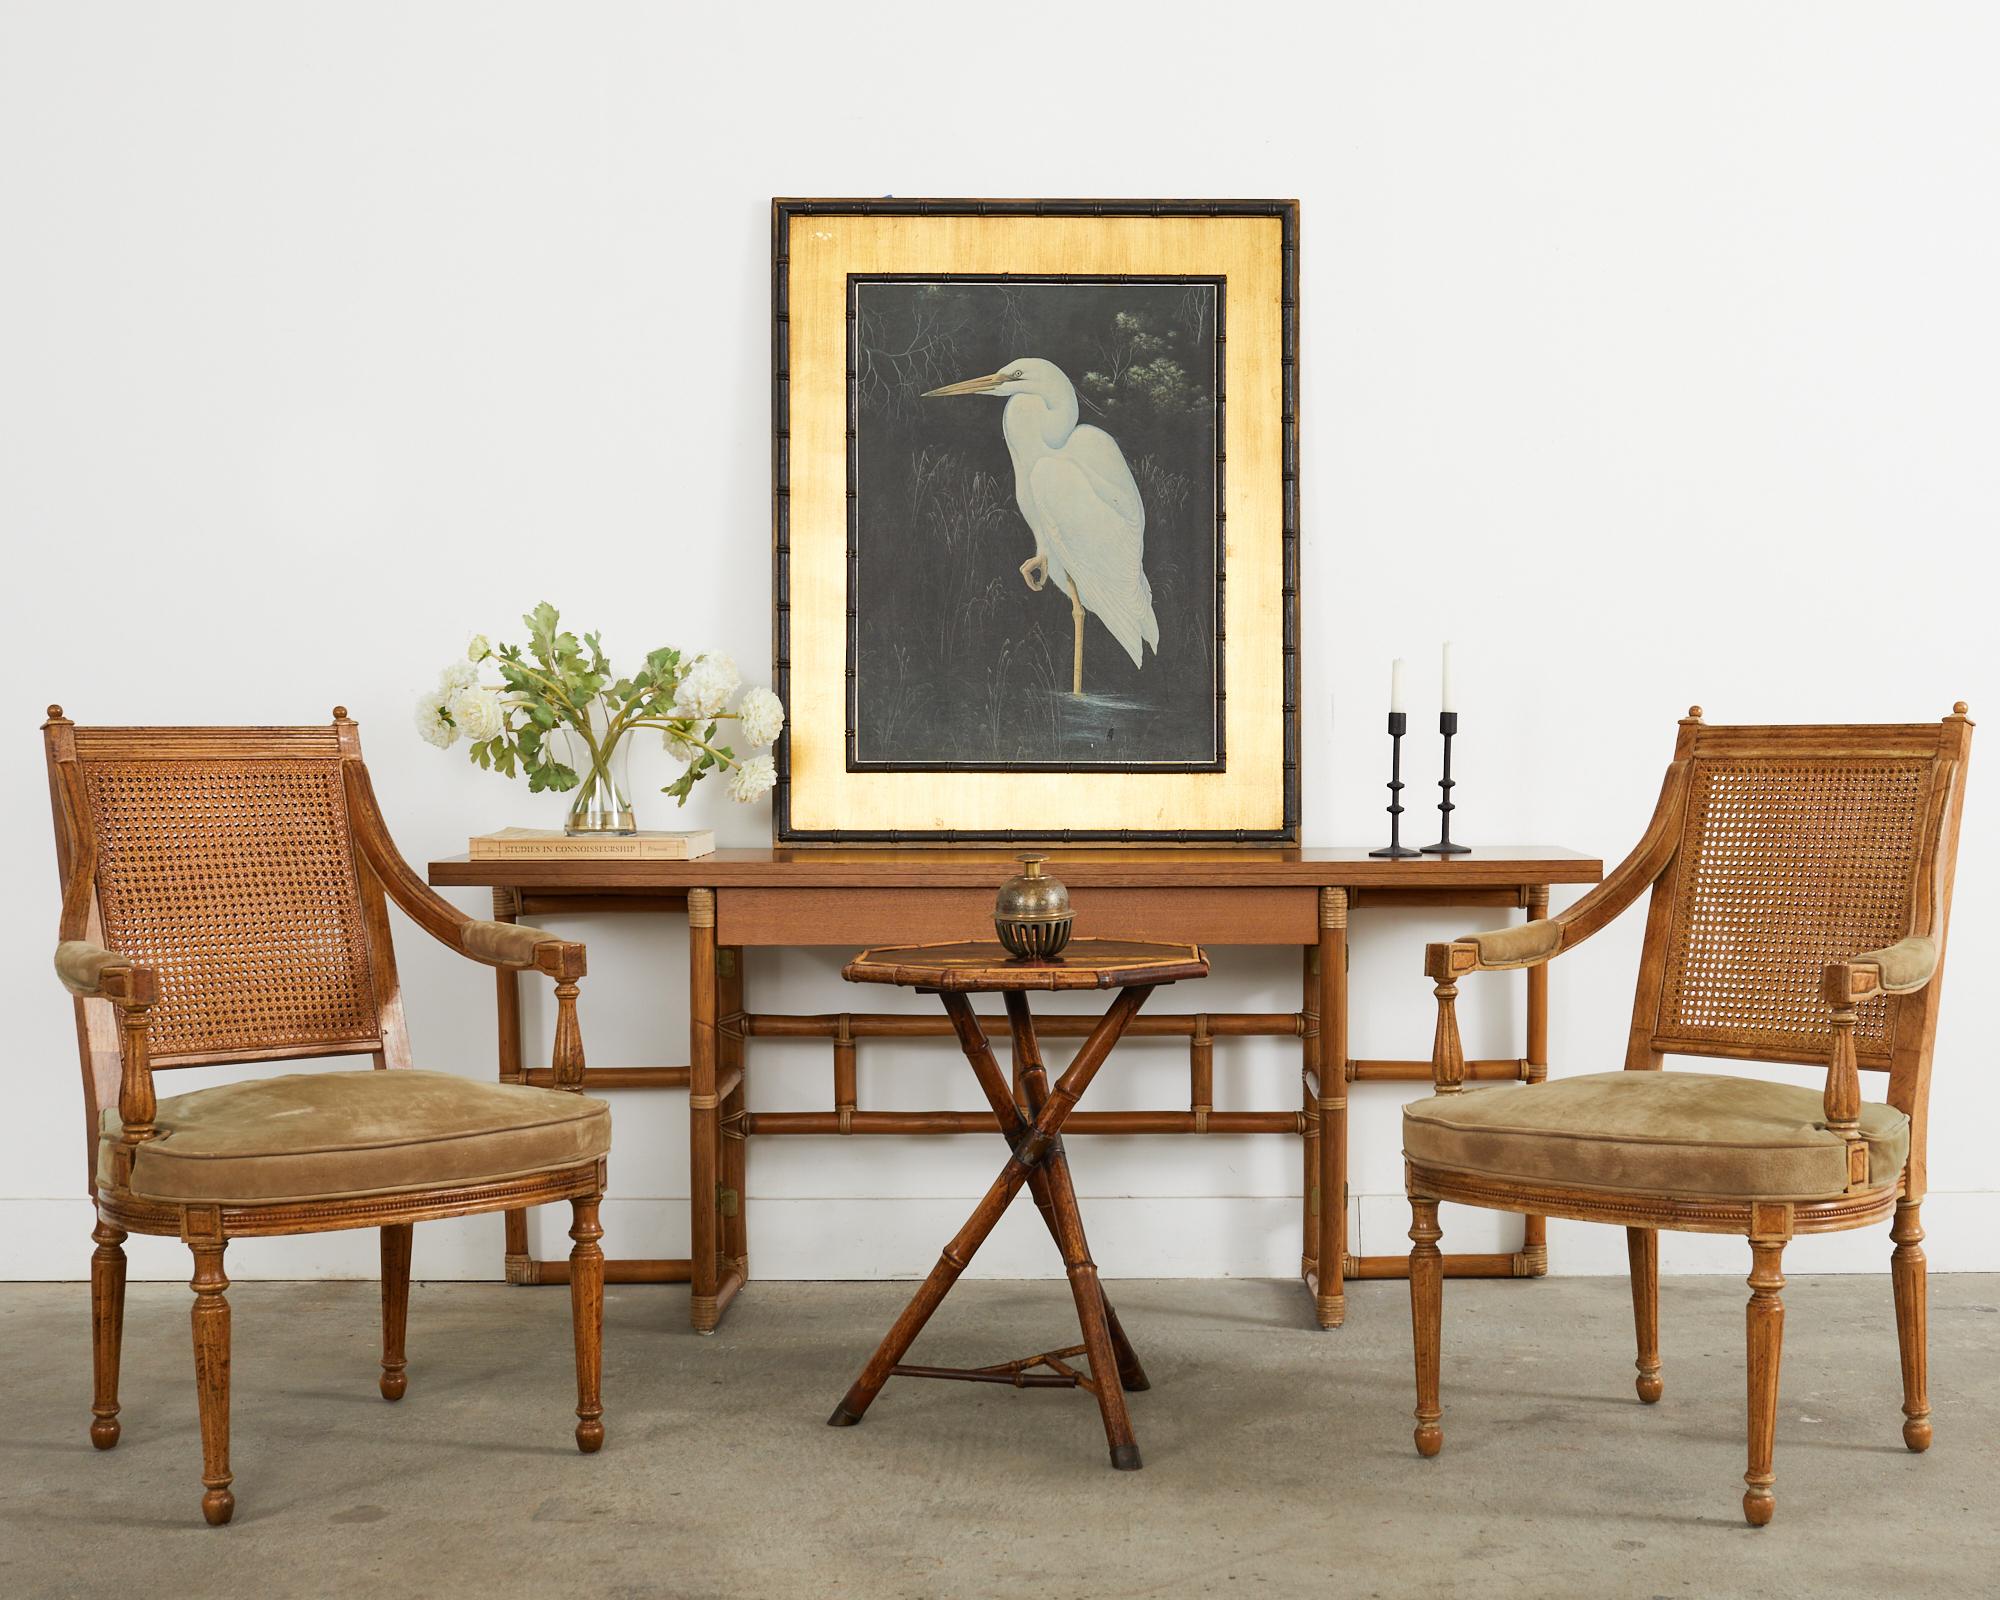 Distinctive pair of late 20th century caned armchairs or fauteuils made in the French directoire taste. The chairs feature a square back with a double-caned seat back. The arms gracefully curve down to a generous round seat with a suede leather